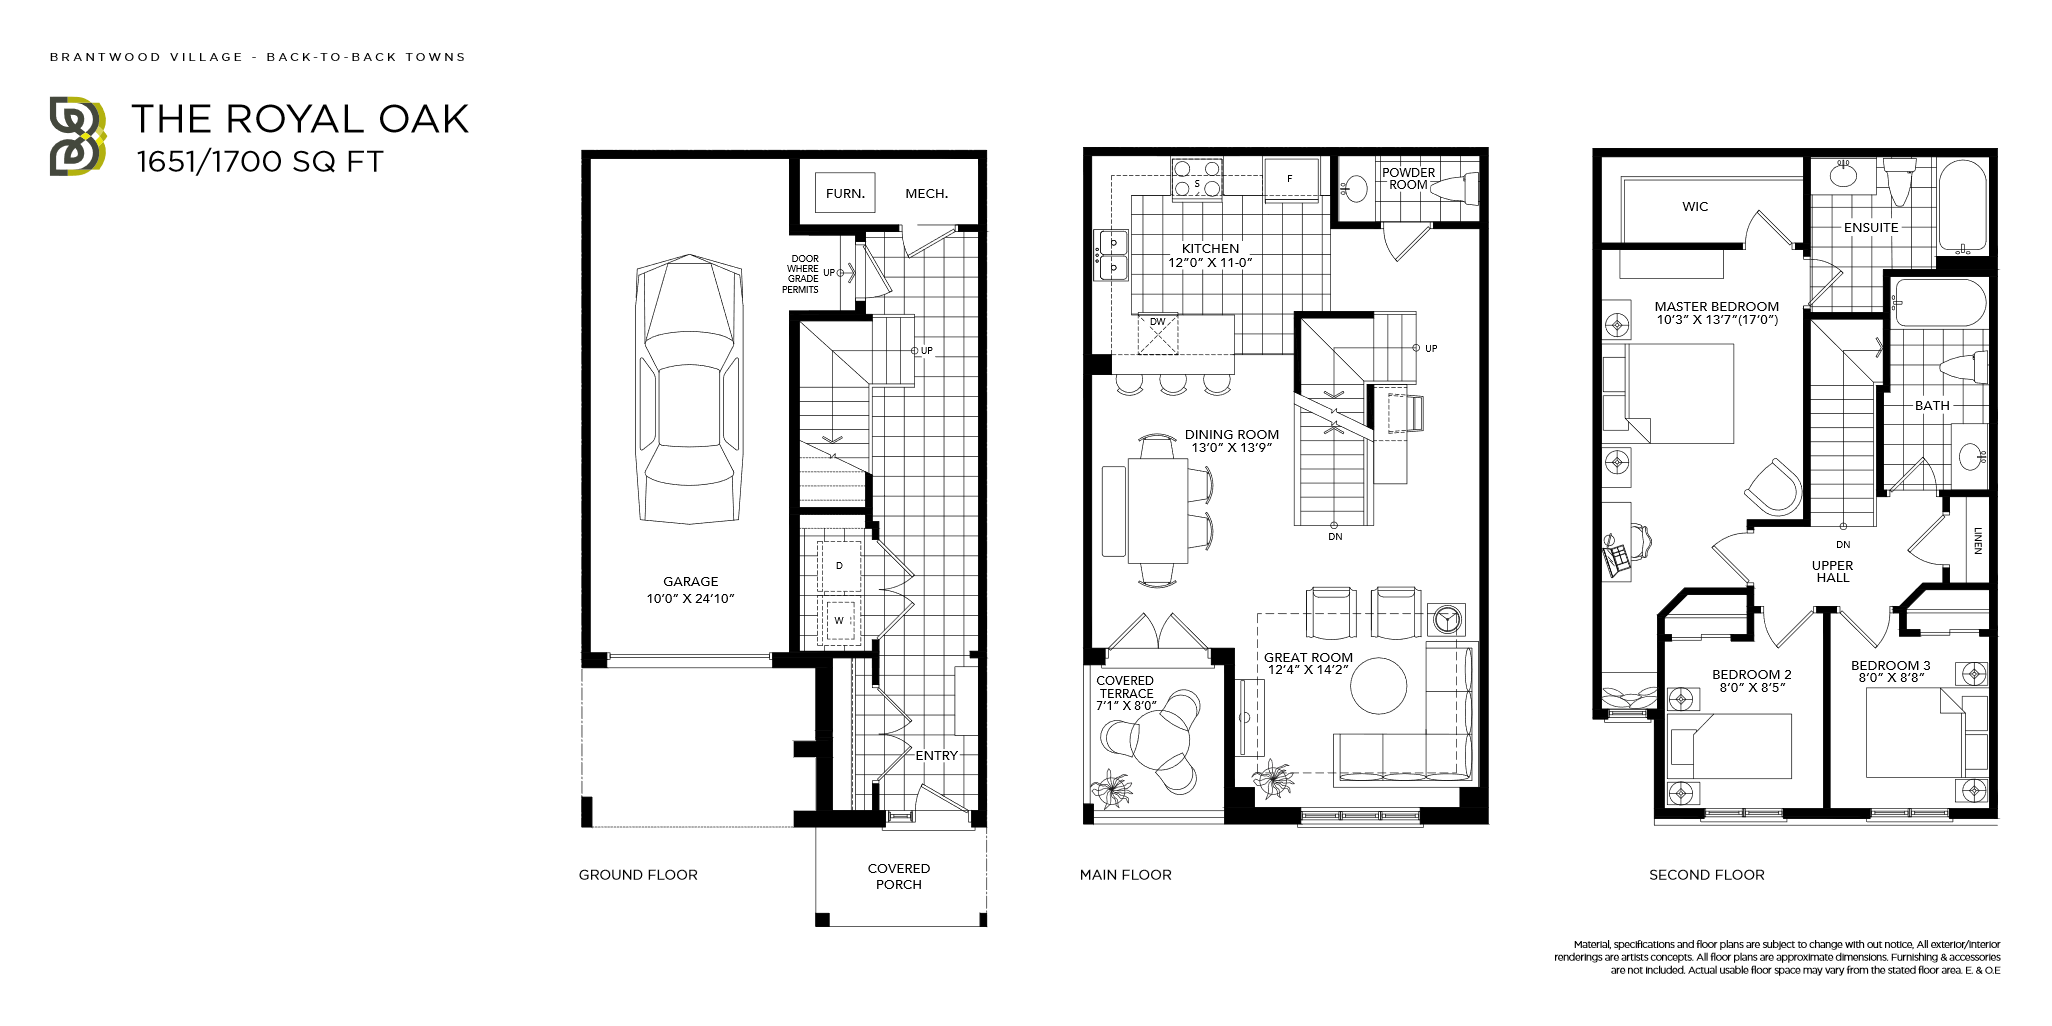  Royal Oak Floor Plan of Brantwood Village Towns with undefined beds